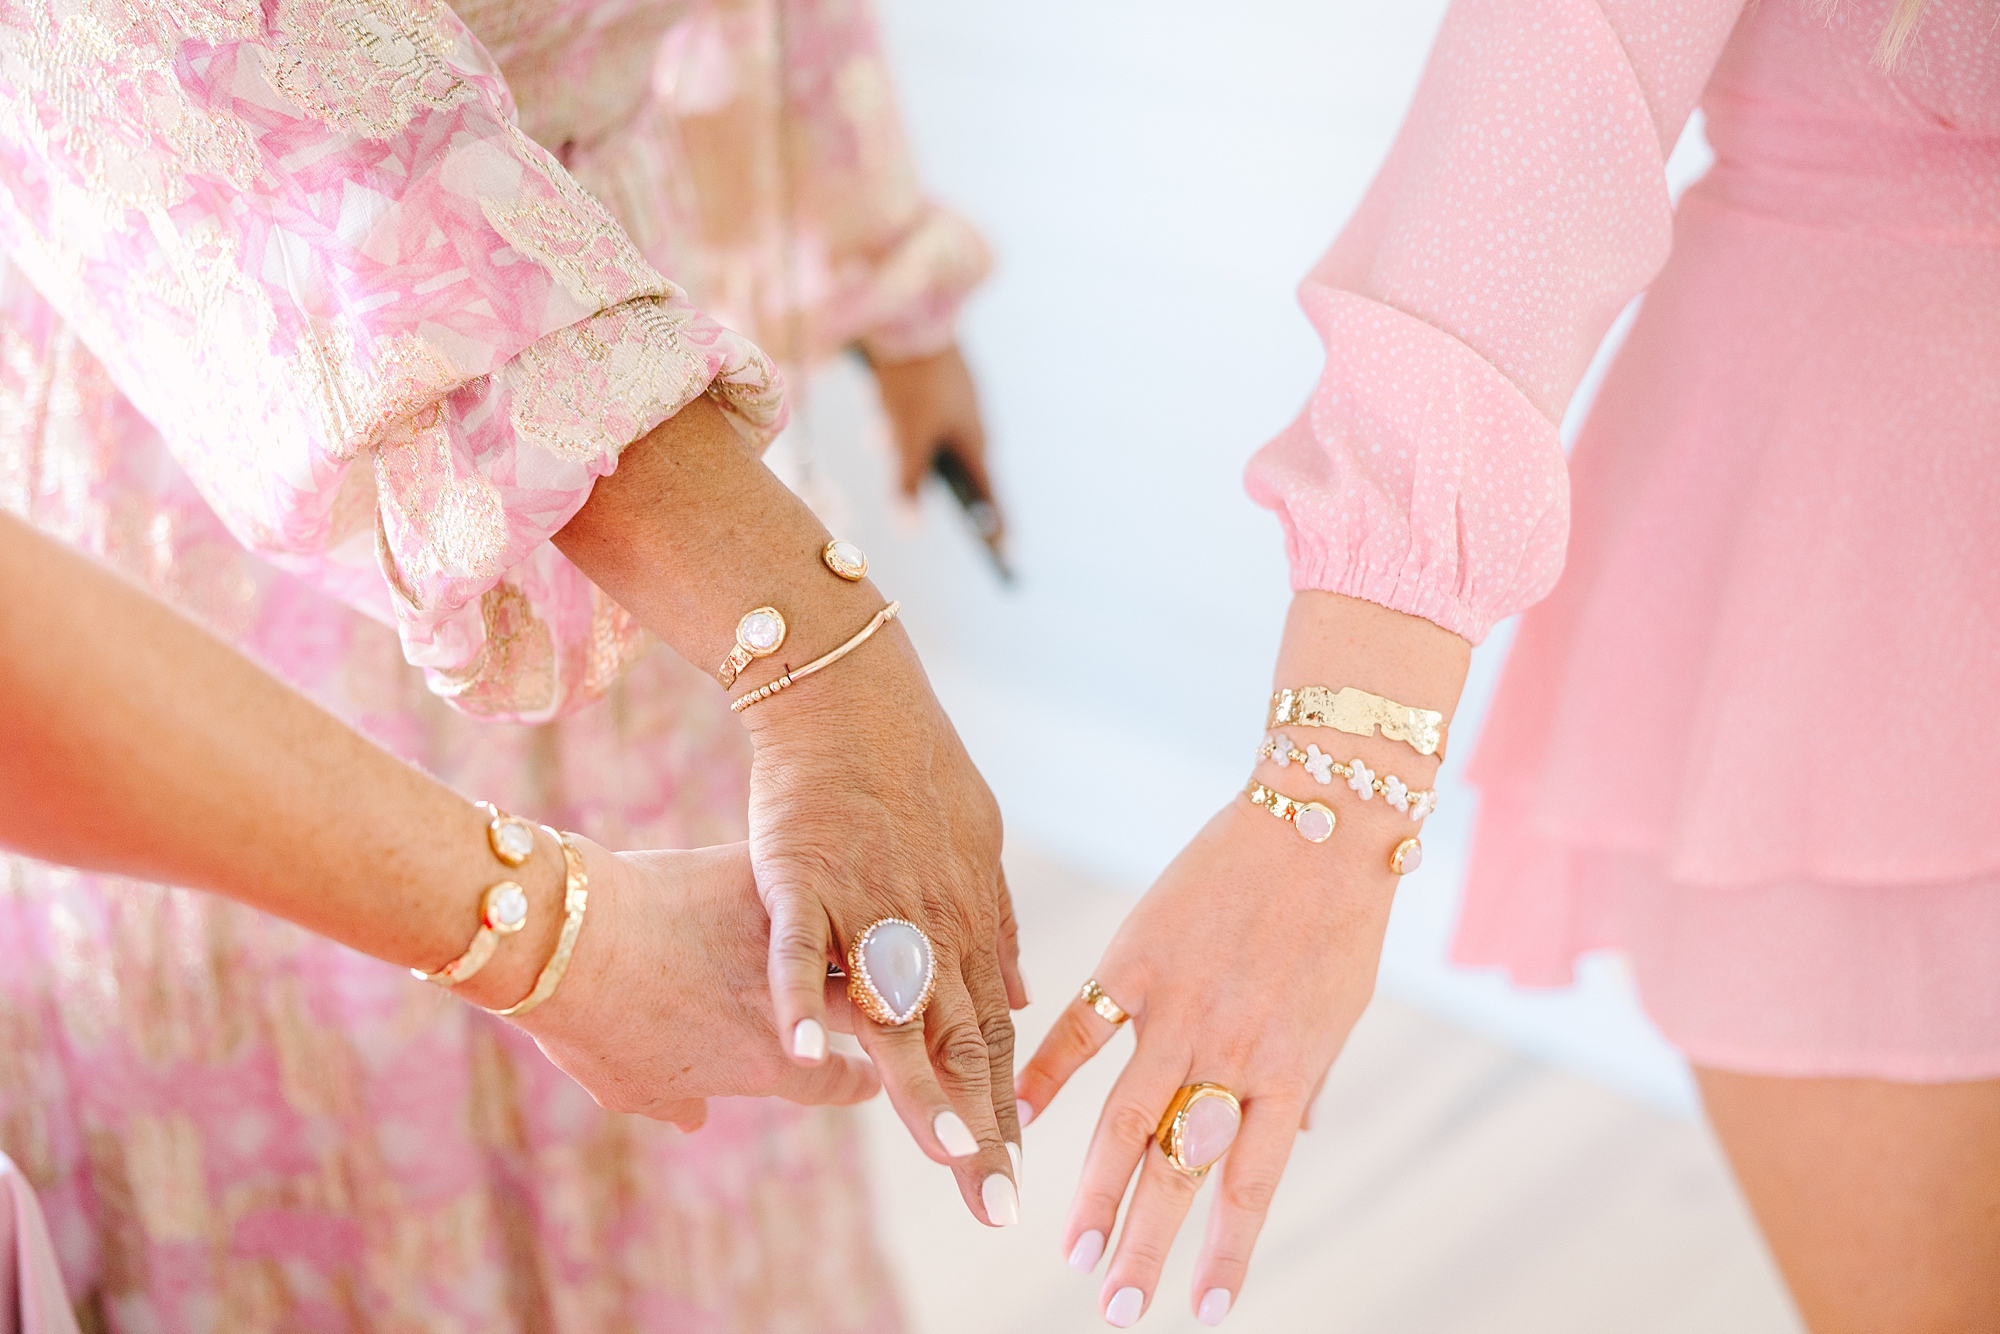 women in pink dresses show off gold jewelry for Galentine's Day Tea